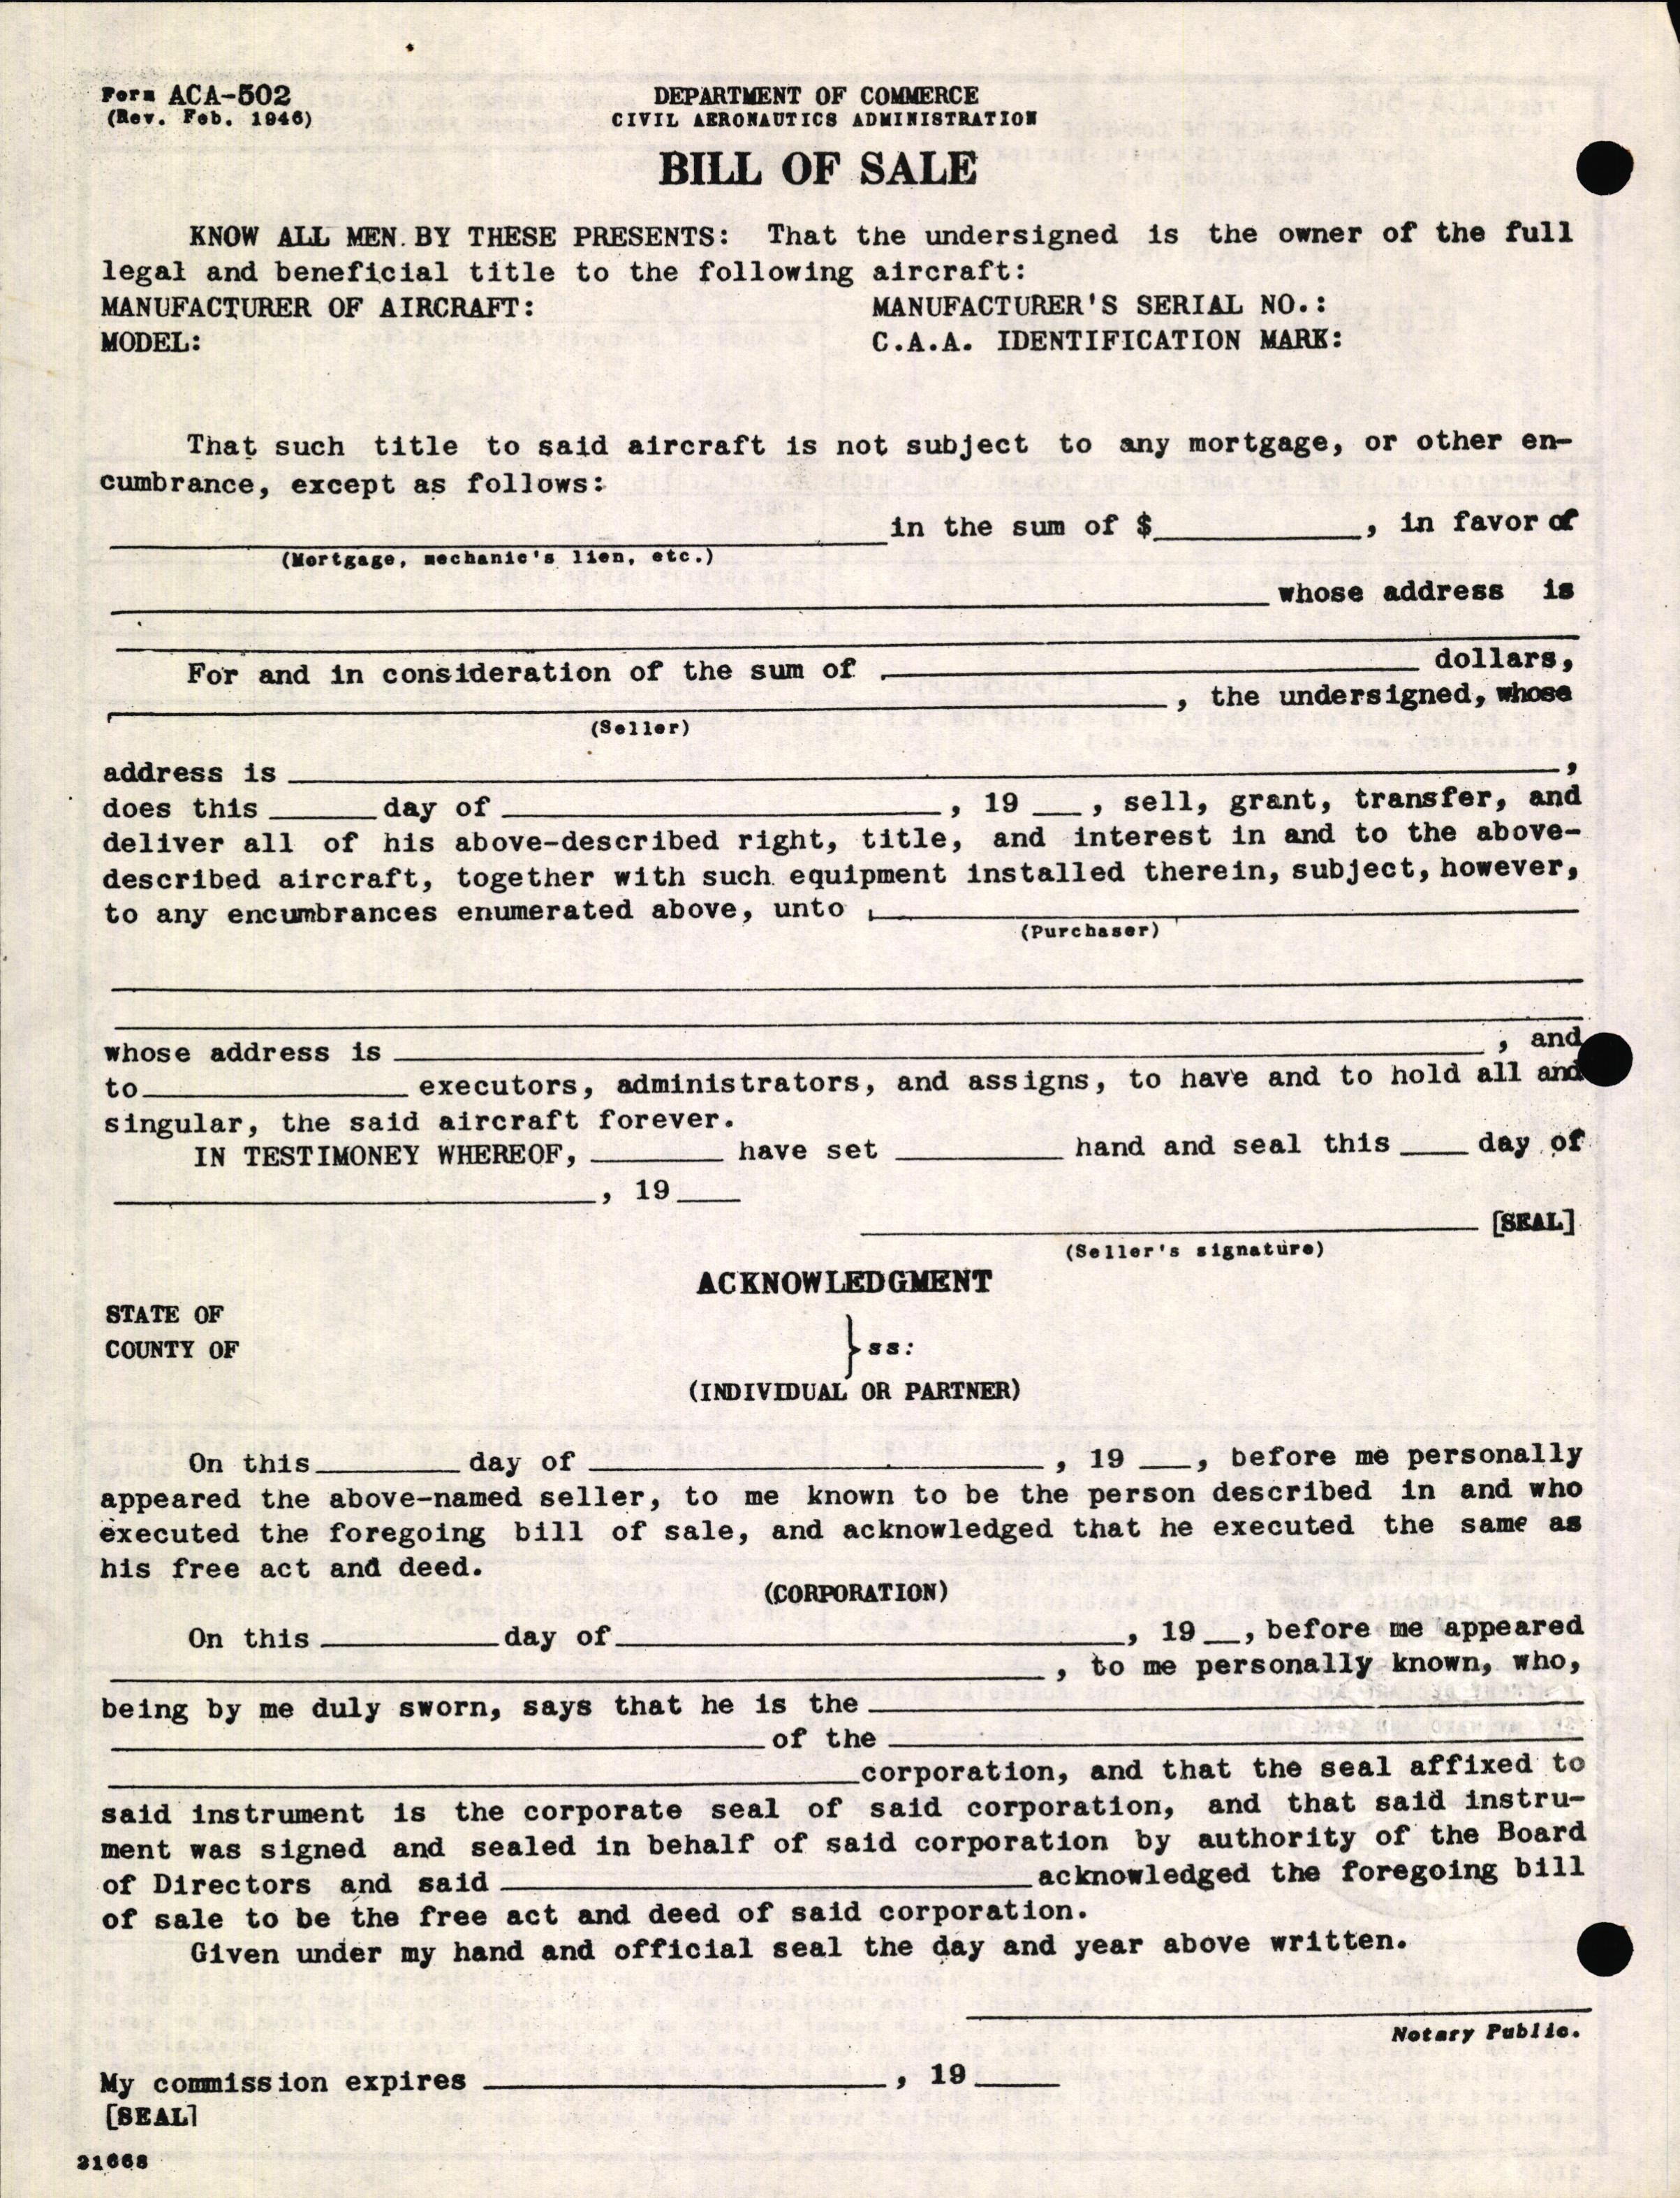 Sample page 4 from AirCorps Library document: Technical Information for Serial Number 2215